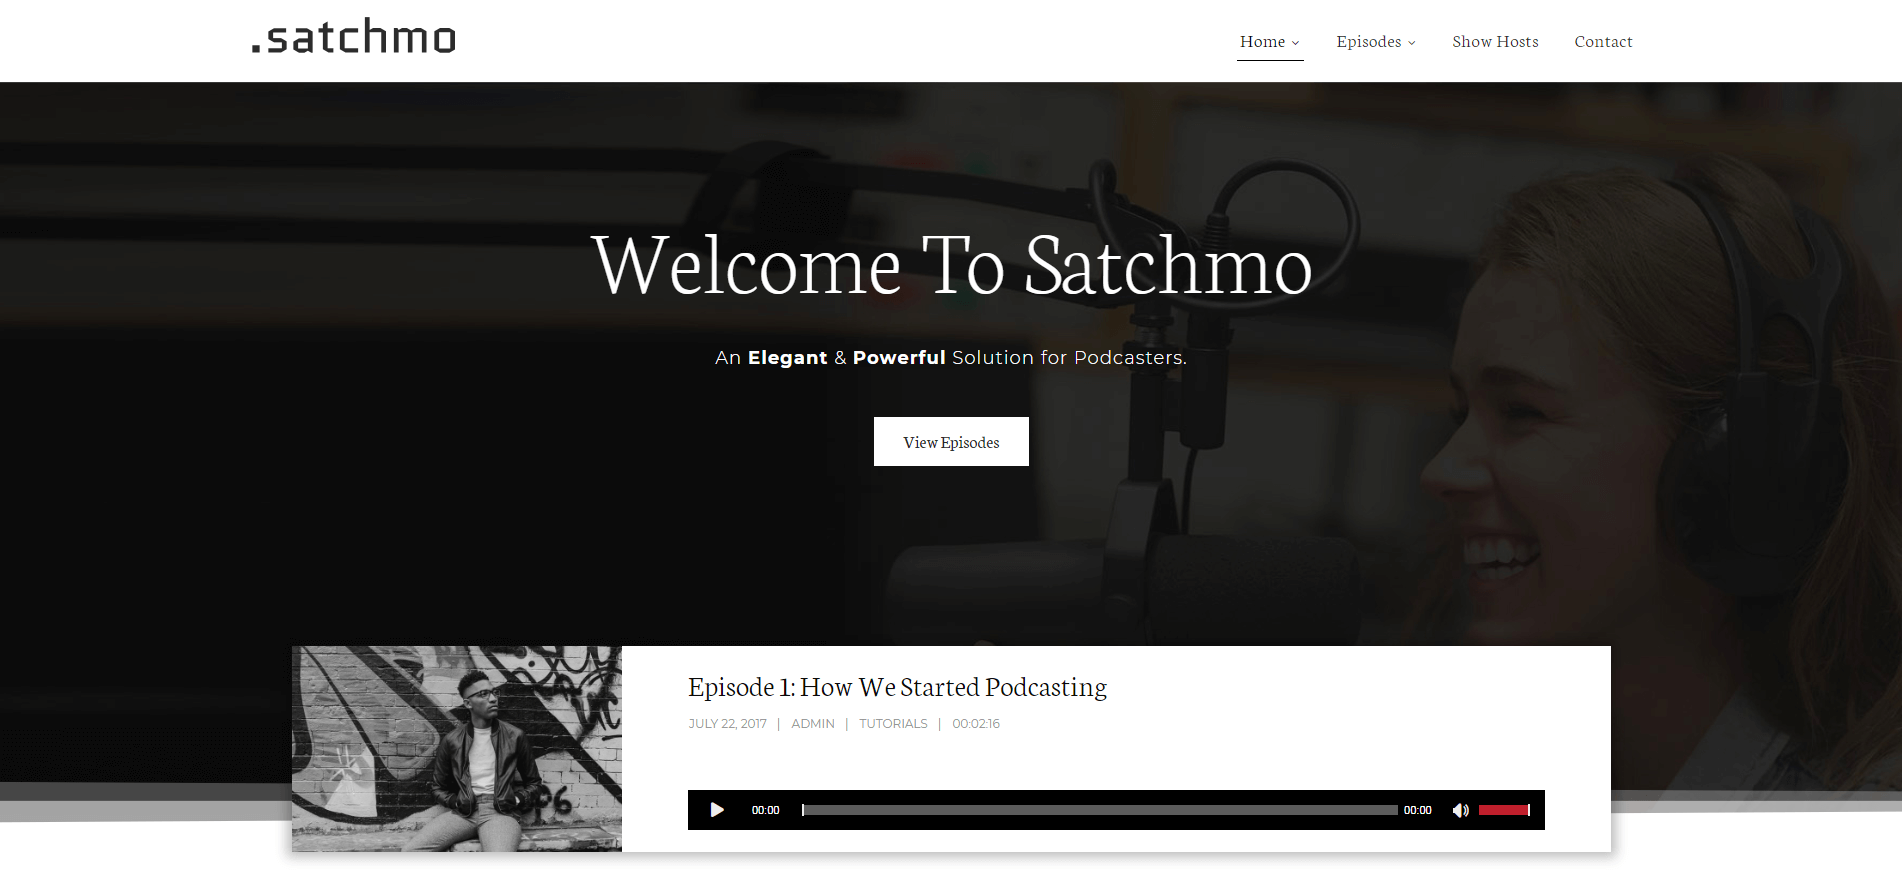 The Satchmo podcasting theme.